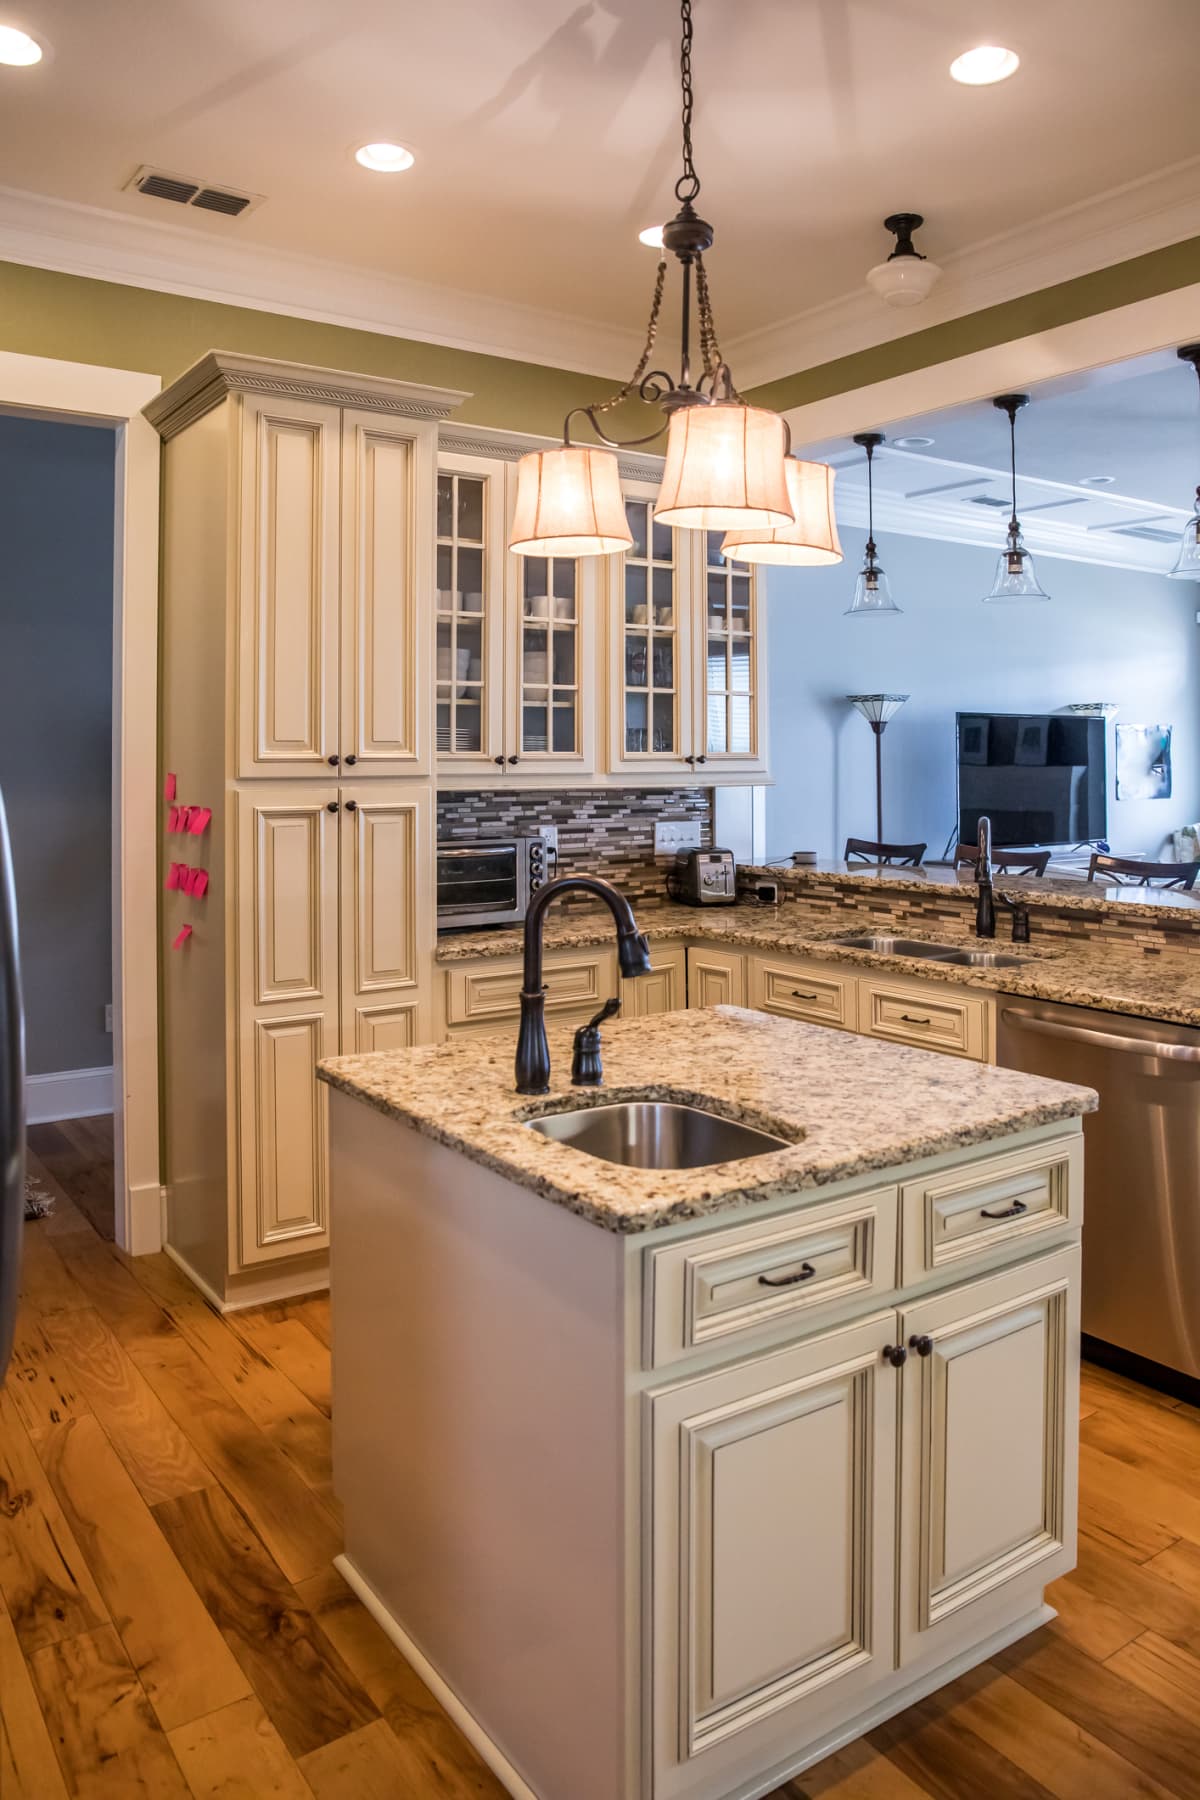 A traditional style compact kitchen with quartz countertops